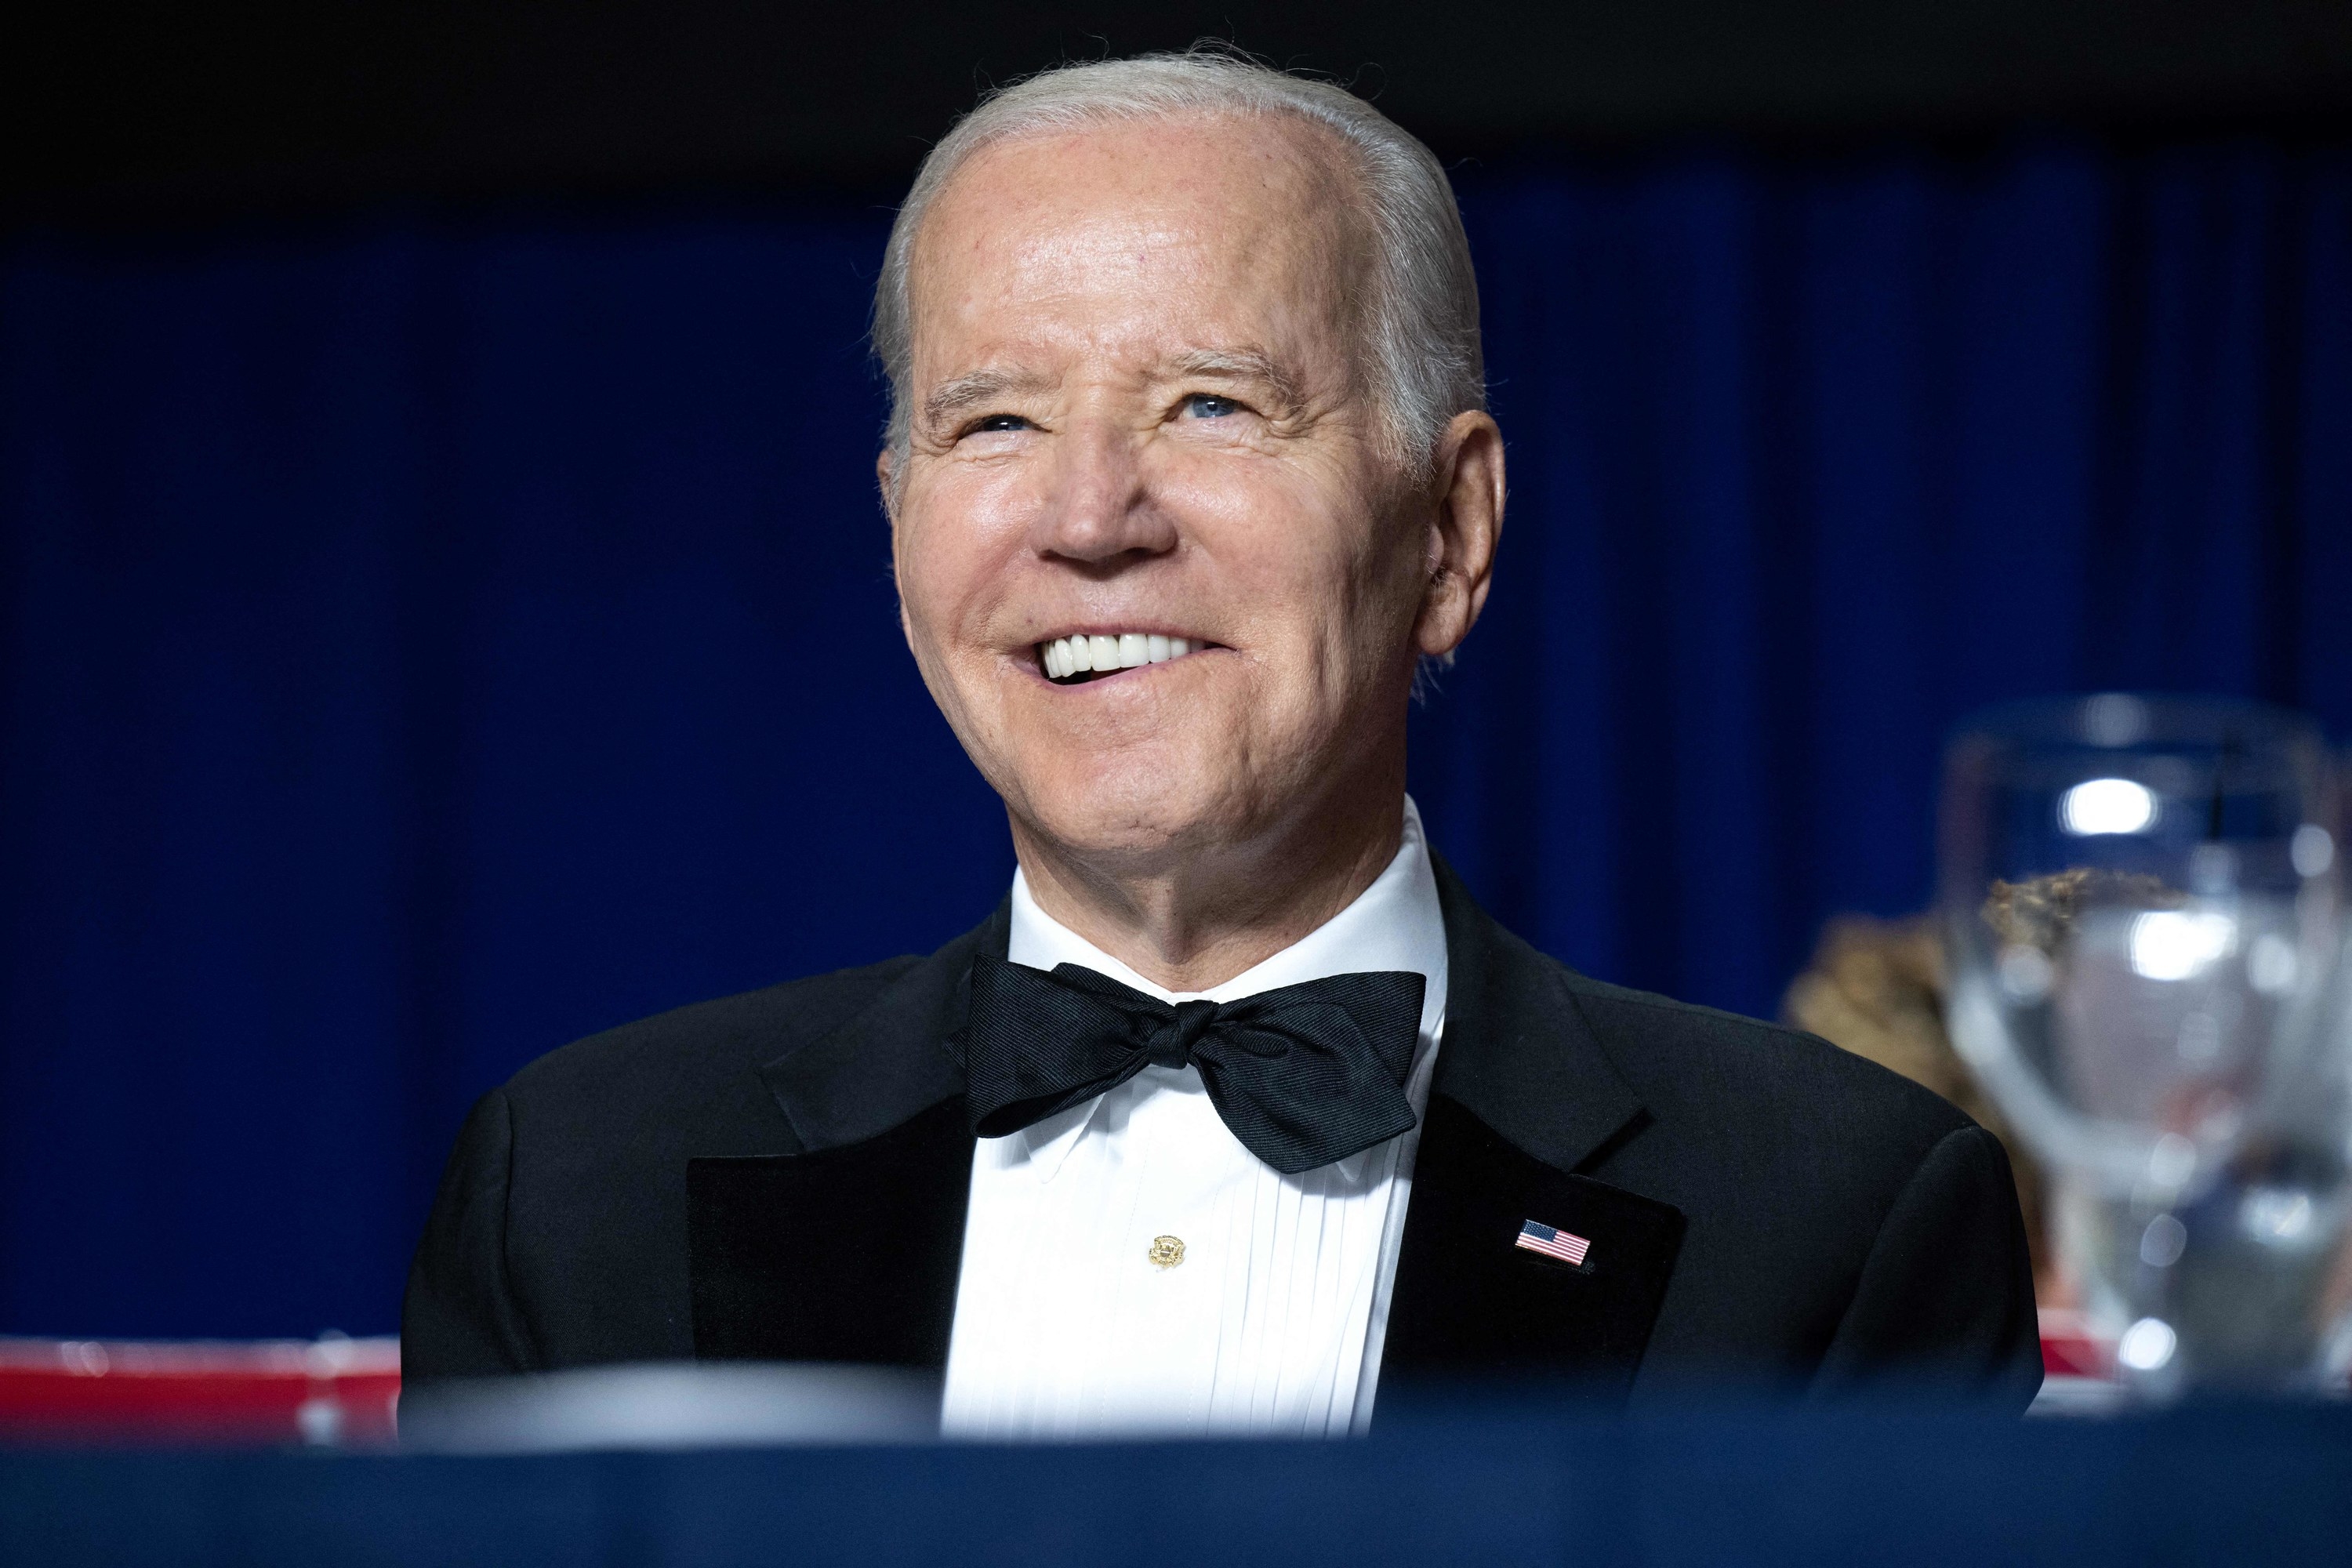 A closeup of President Biden smiling at a black tie event